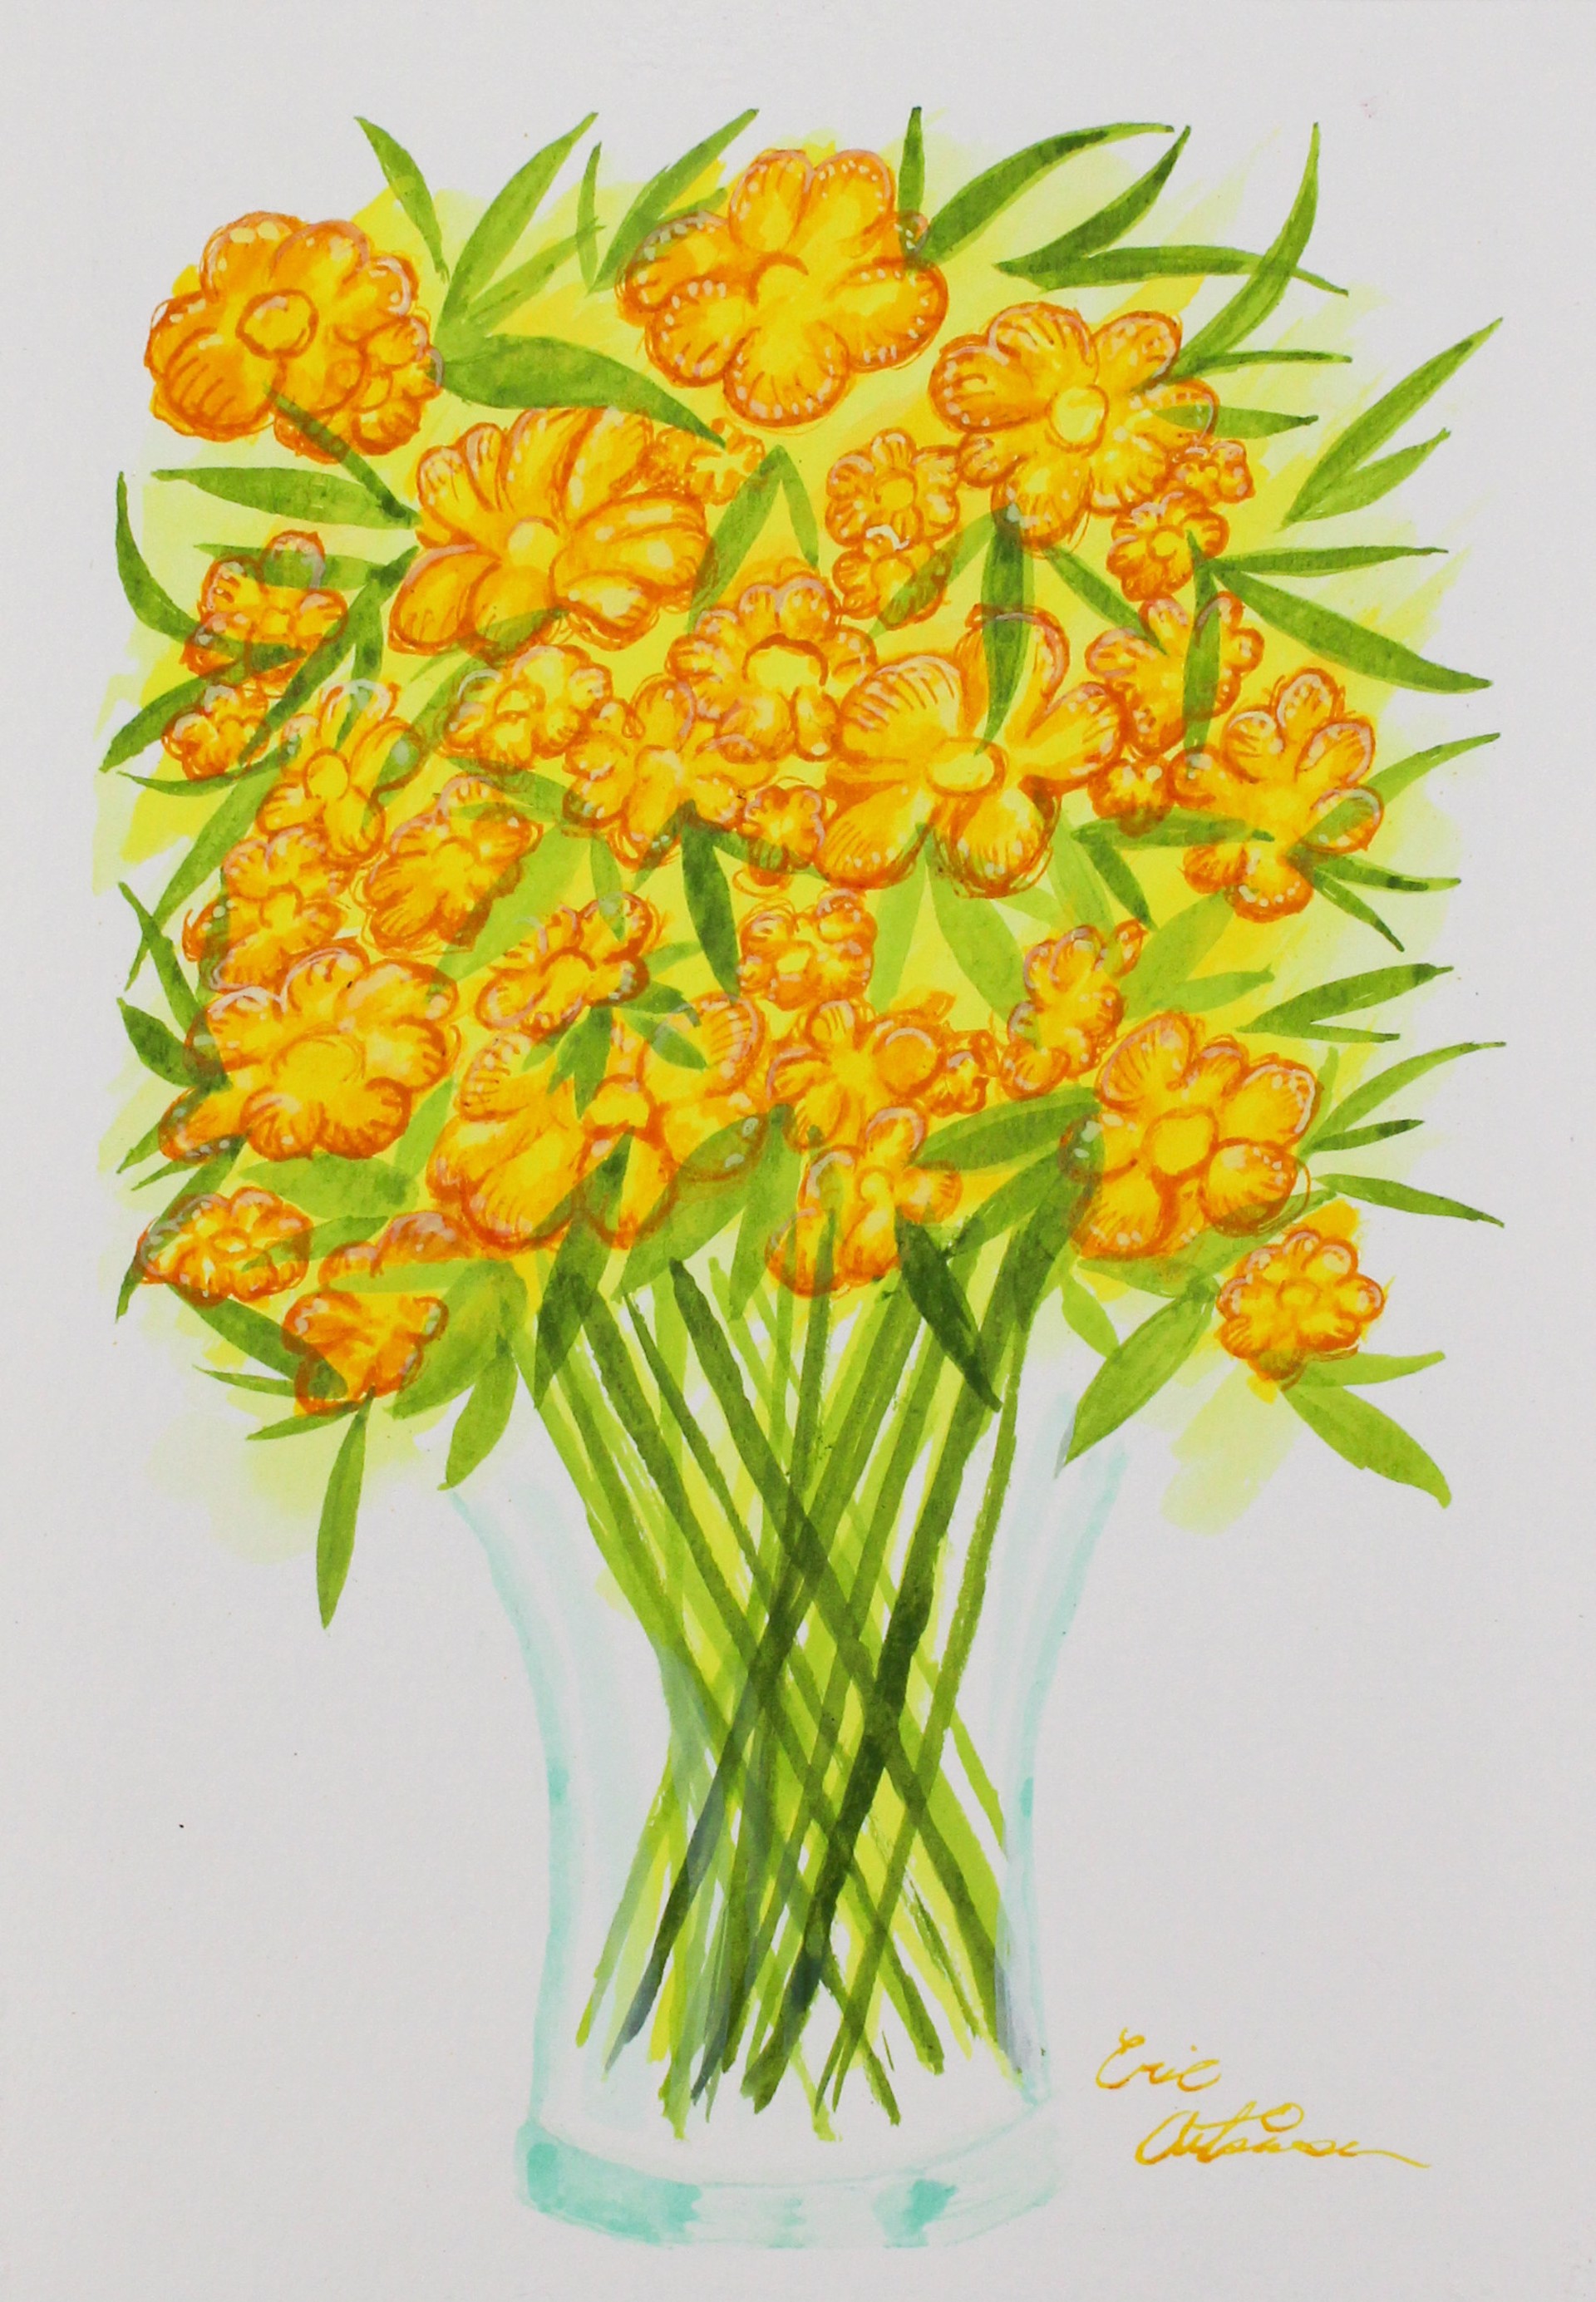 Yellow Flowers by Eric Atkinson